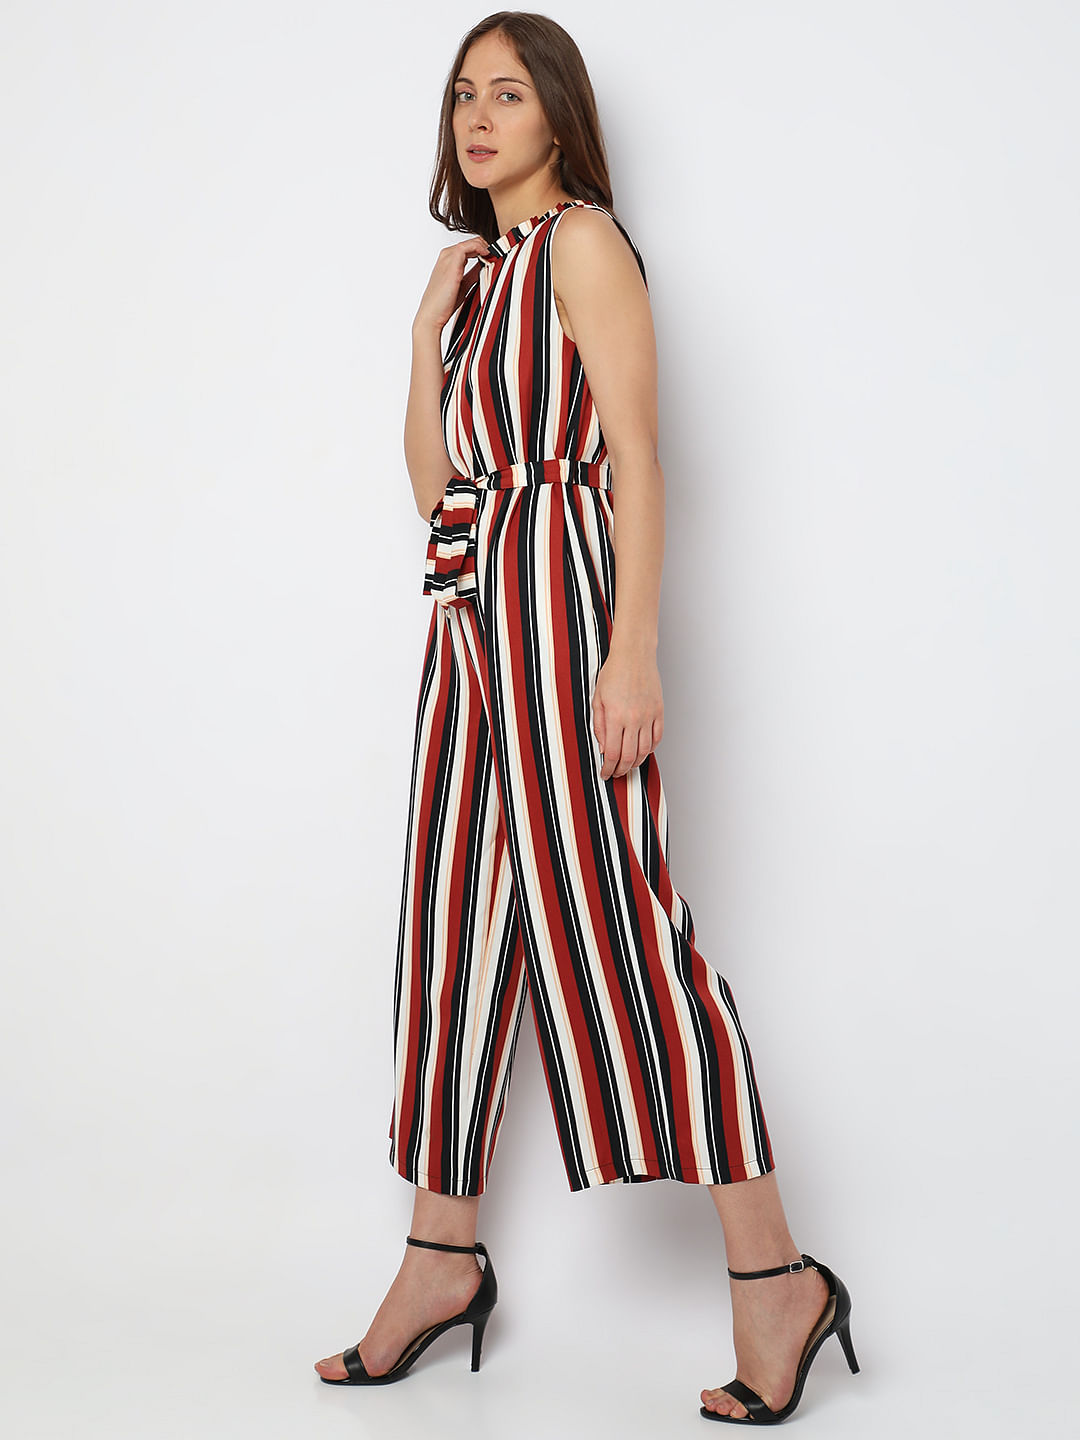 Discover 80+ red striped jumpsuit